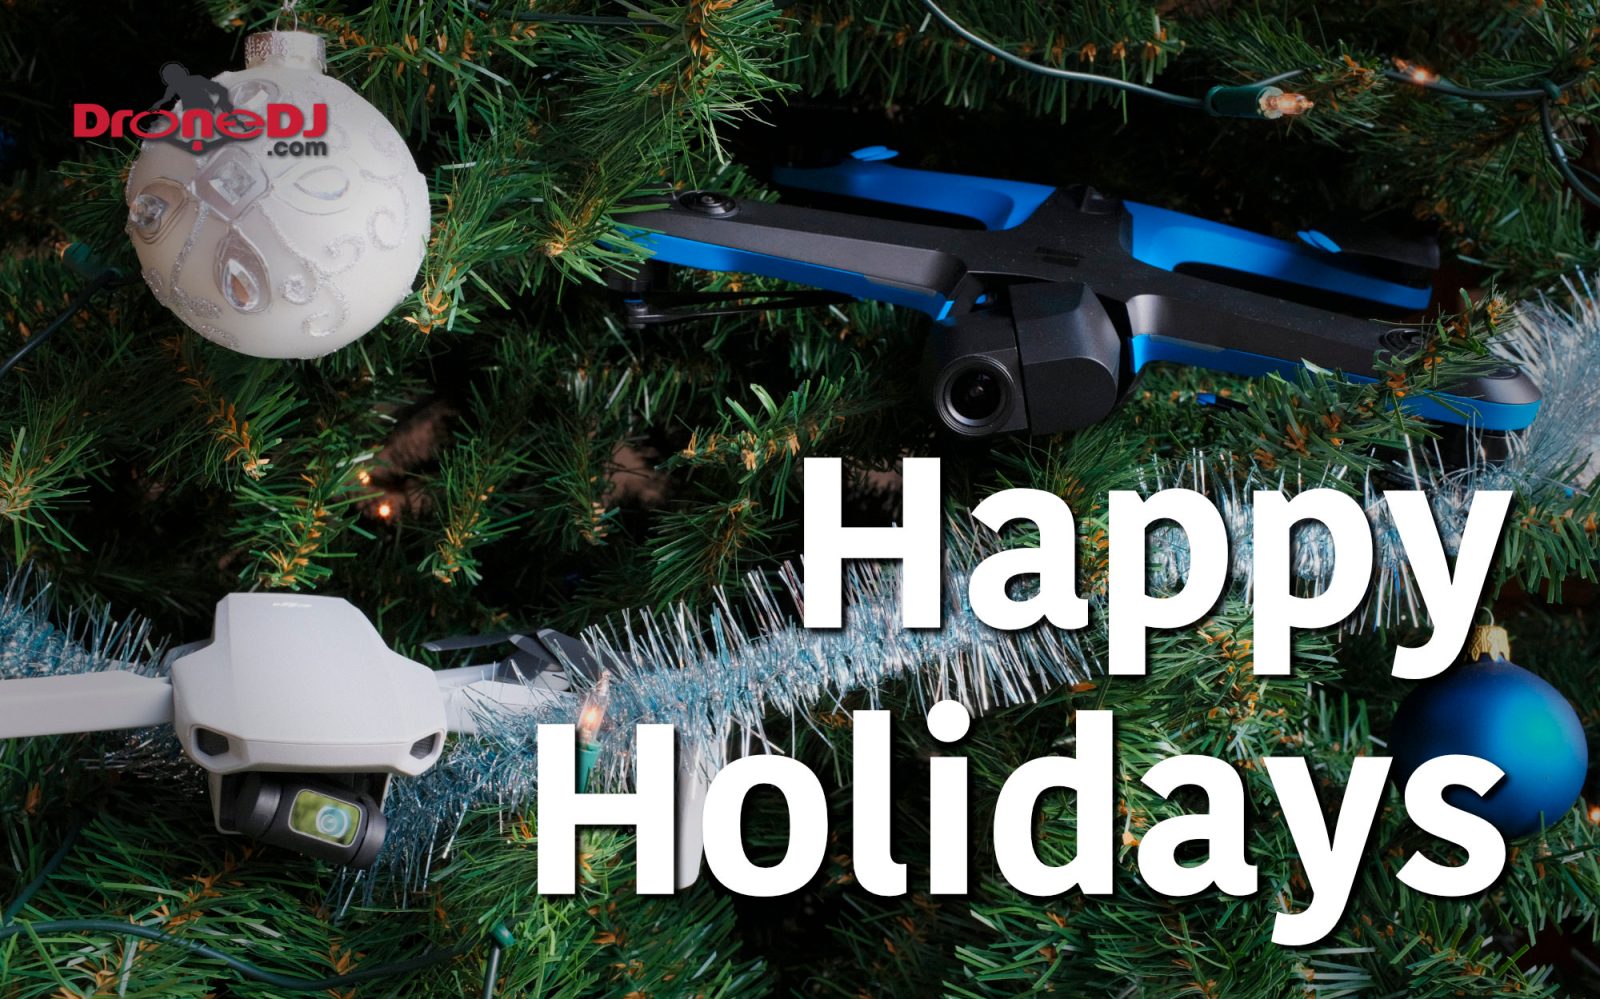 Happy holidays, best wishes and lots of drone flying in 2020 from the DroneDJ team to all our readers, viewers and listeners around the world.